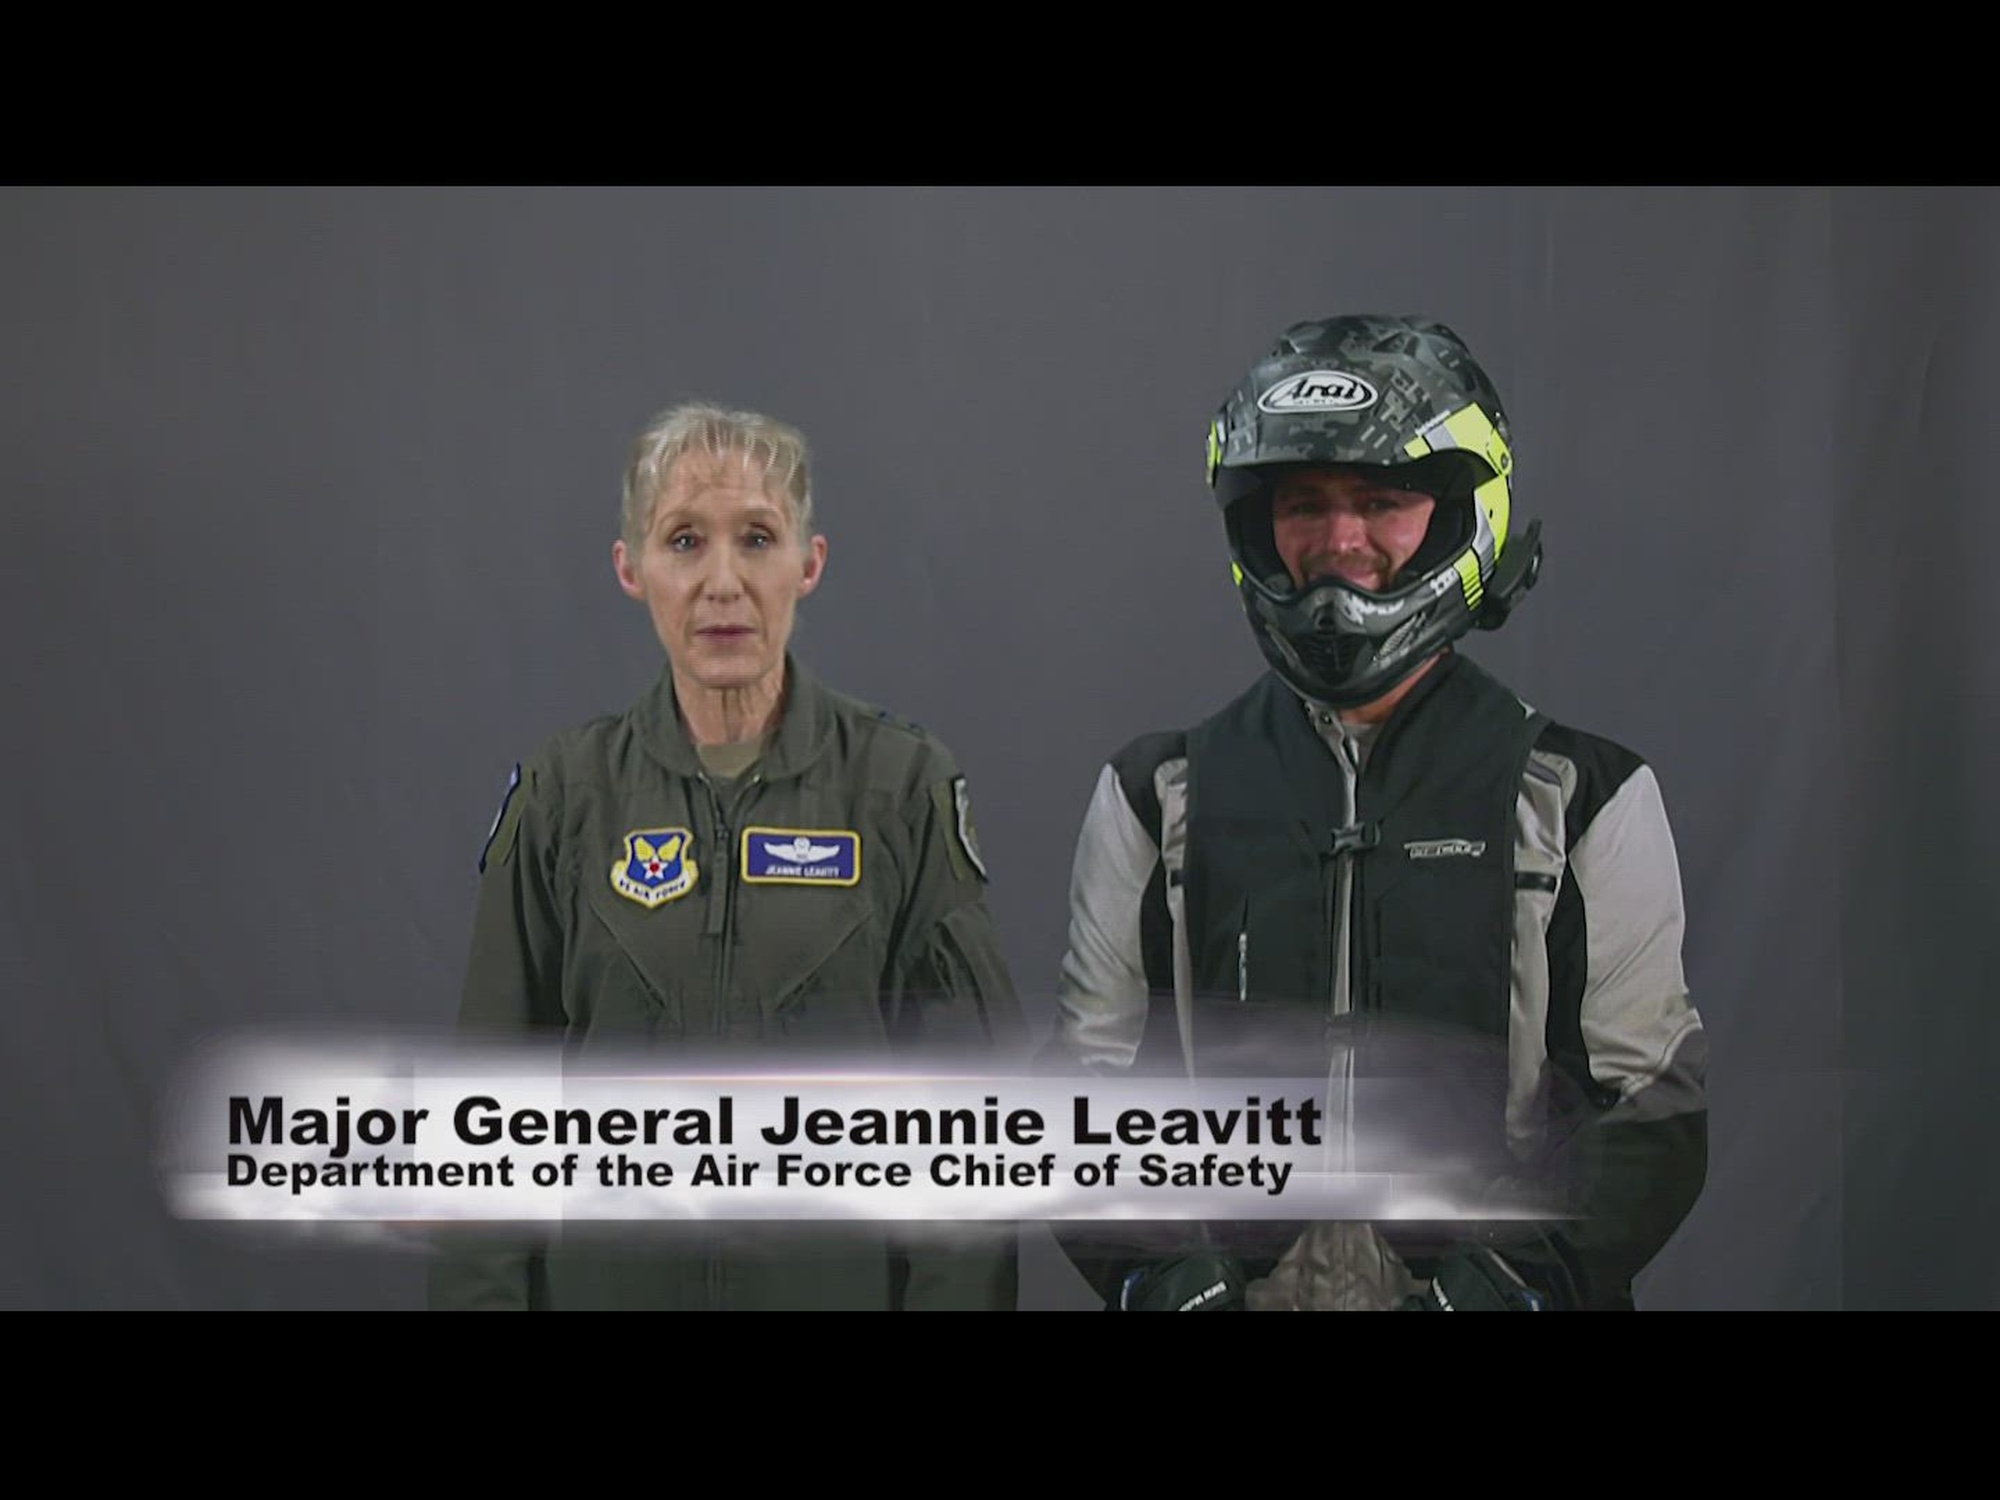 Maj Gen. Jeannie Leavitt, Department of the Air Force, chief of safety, introduces the Motorcycle Preseason Kickoff of the DAFRider video series with David Brandt, Department of the Air Force, motorcycle safety program manager.